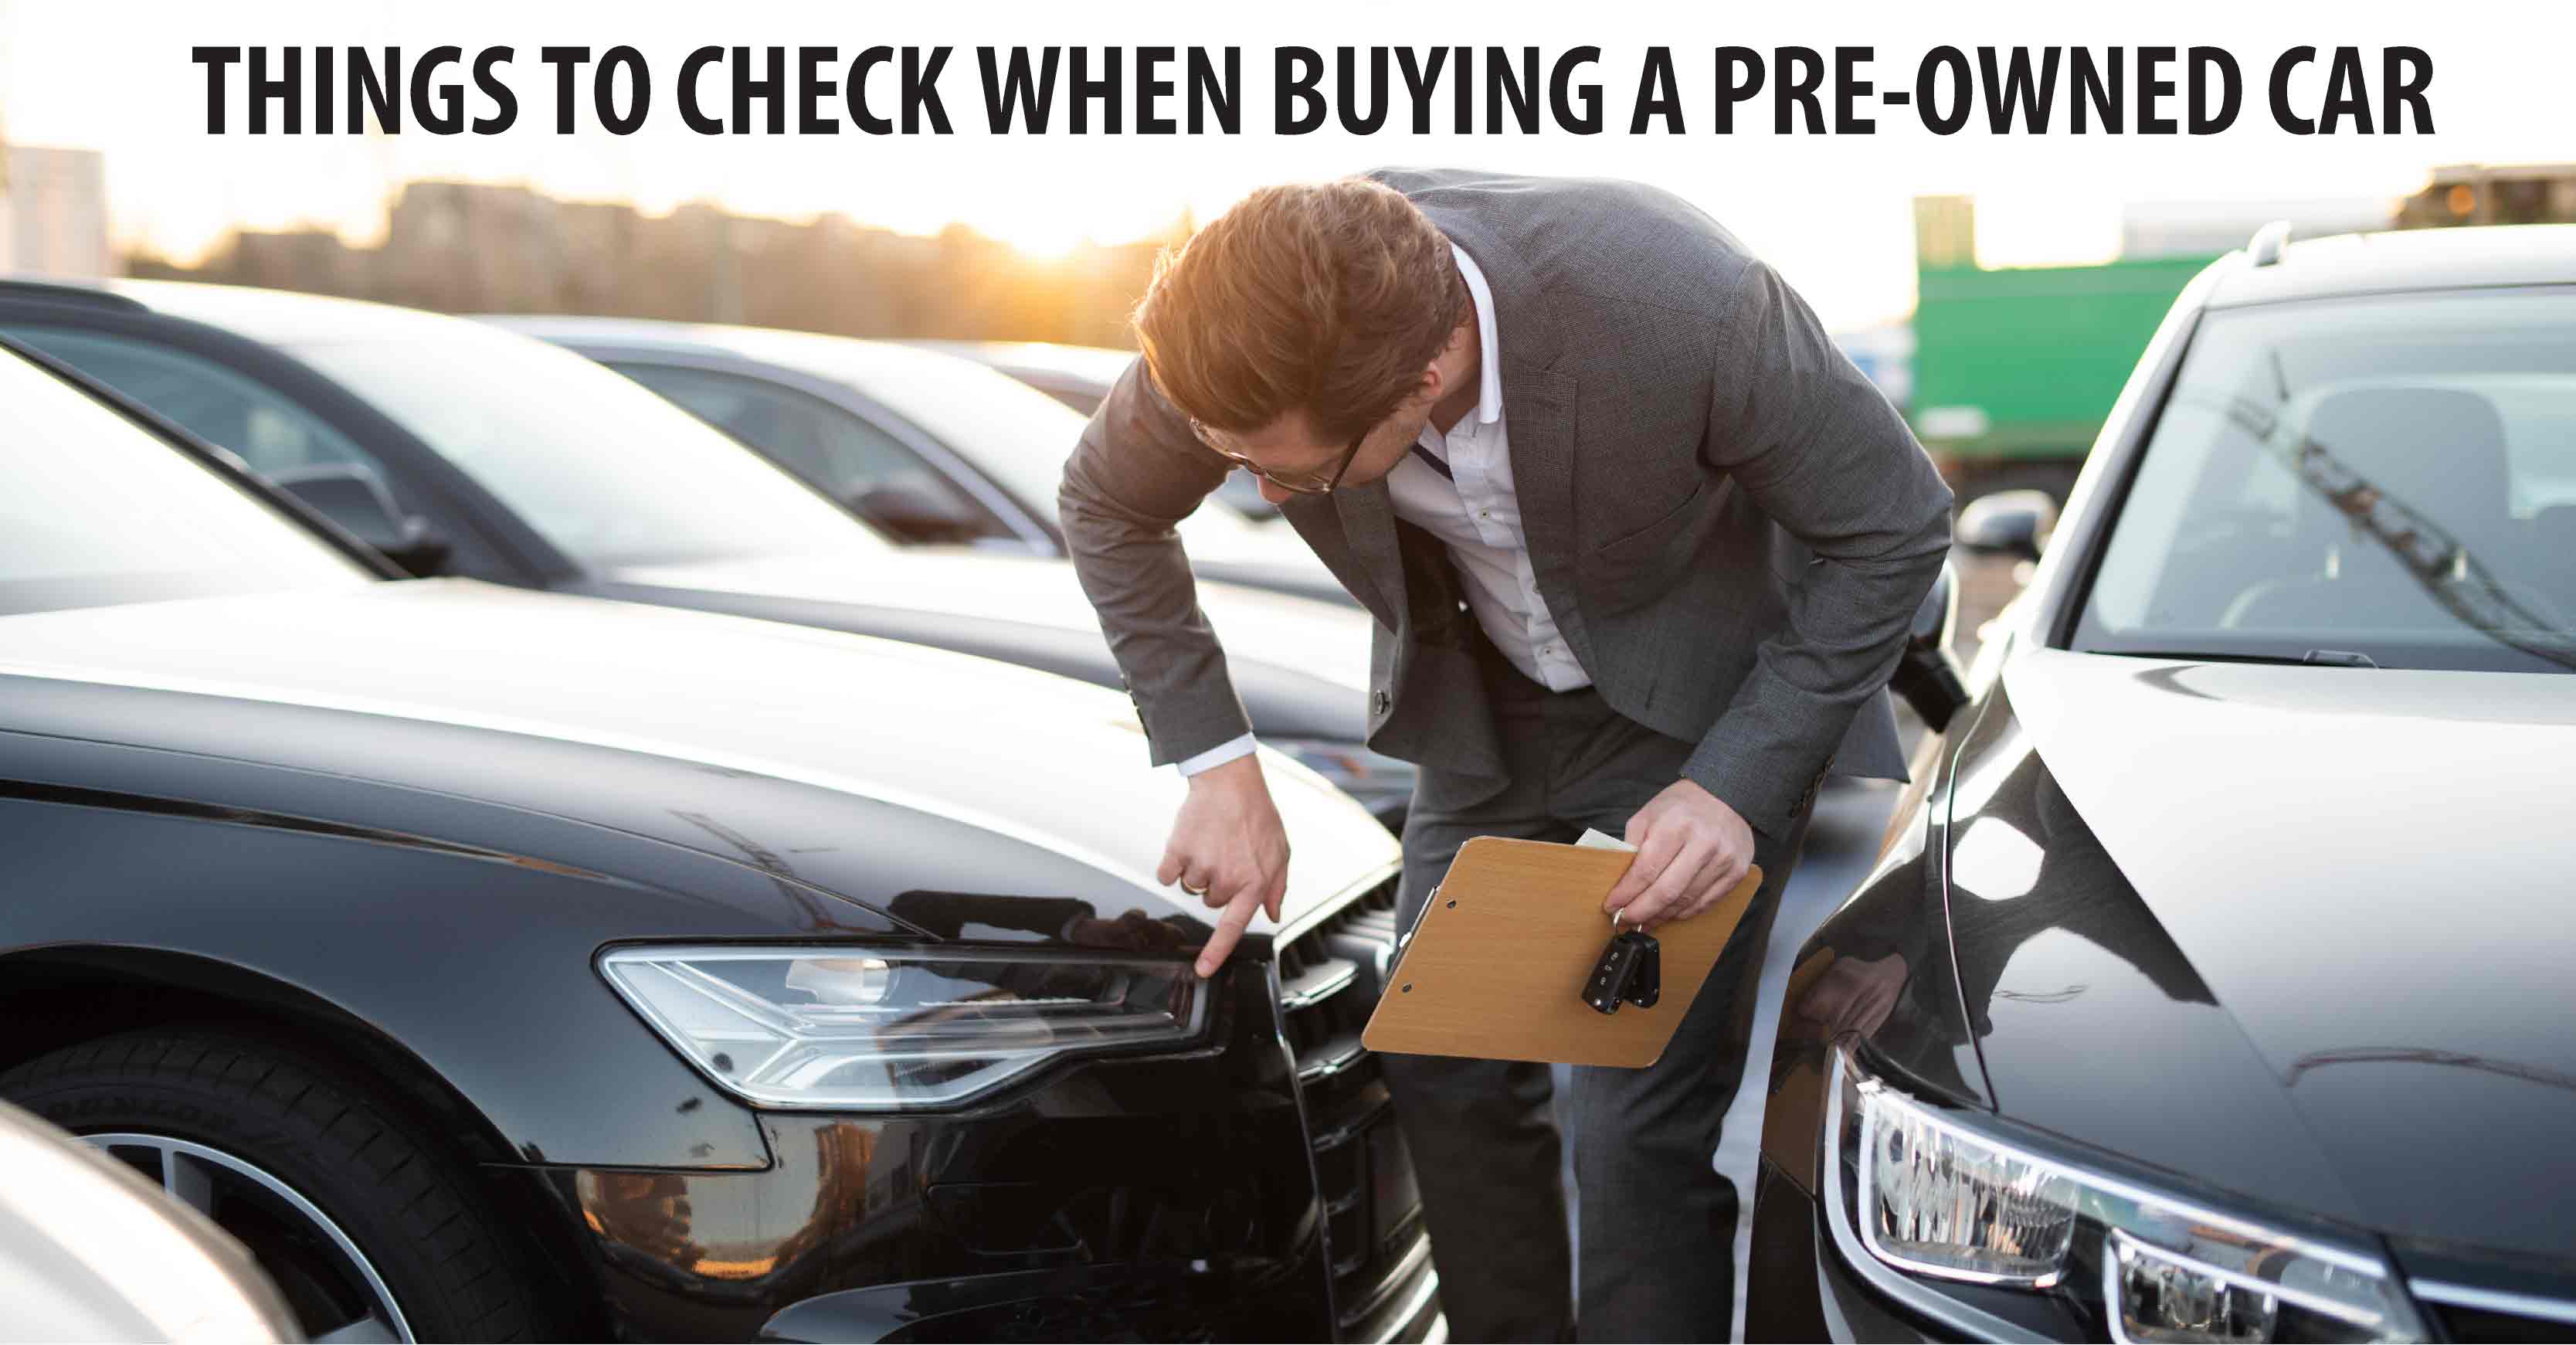 THINGS TO CHECK WHEN BUYING A PRE-OWNED CAR